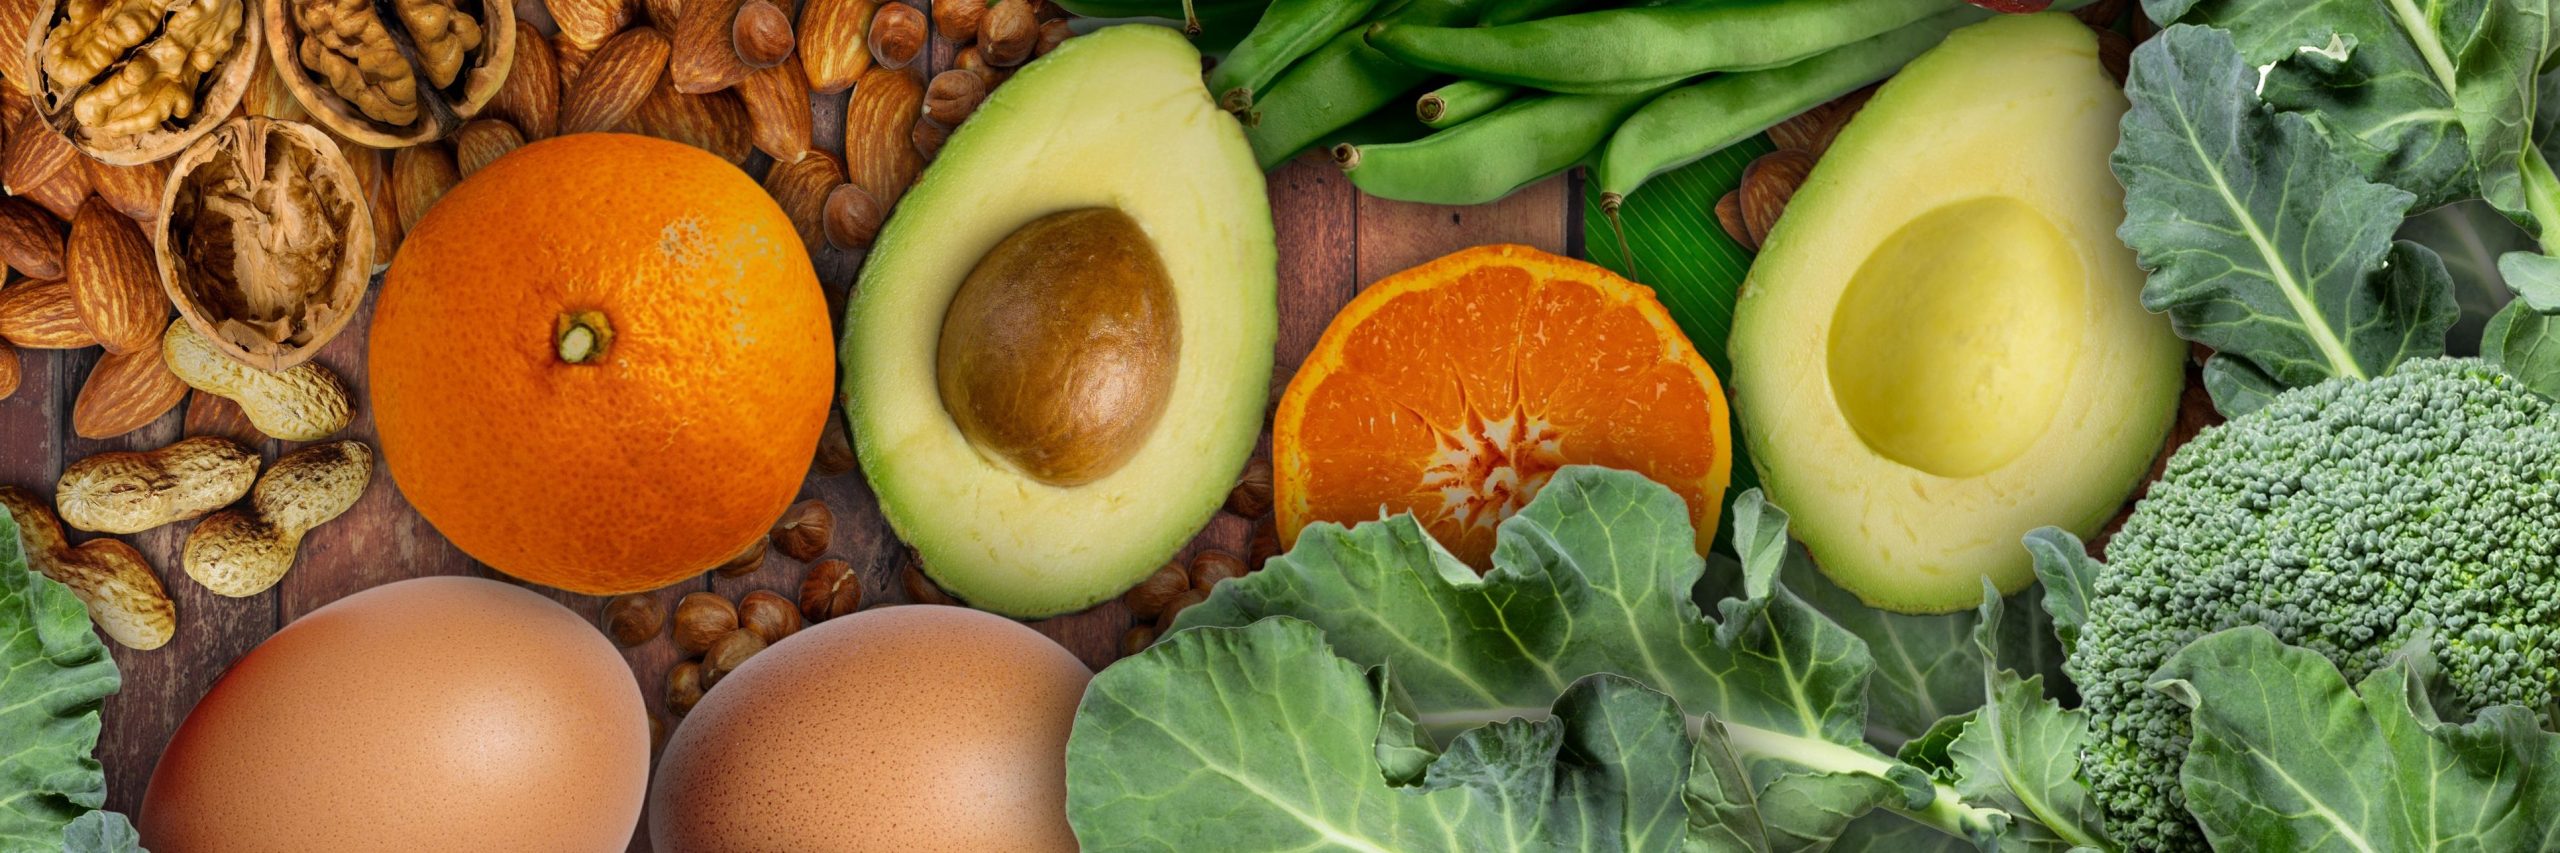 Folate-Rich Diets Help Prevent or Treat Iron Deficiency in Heart Failure.